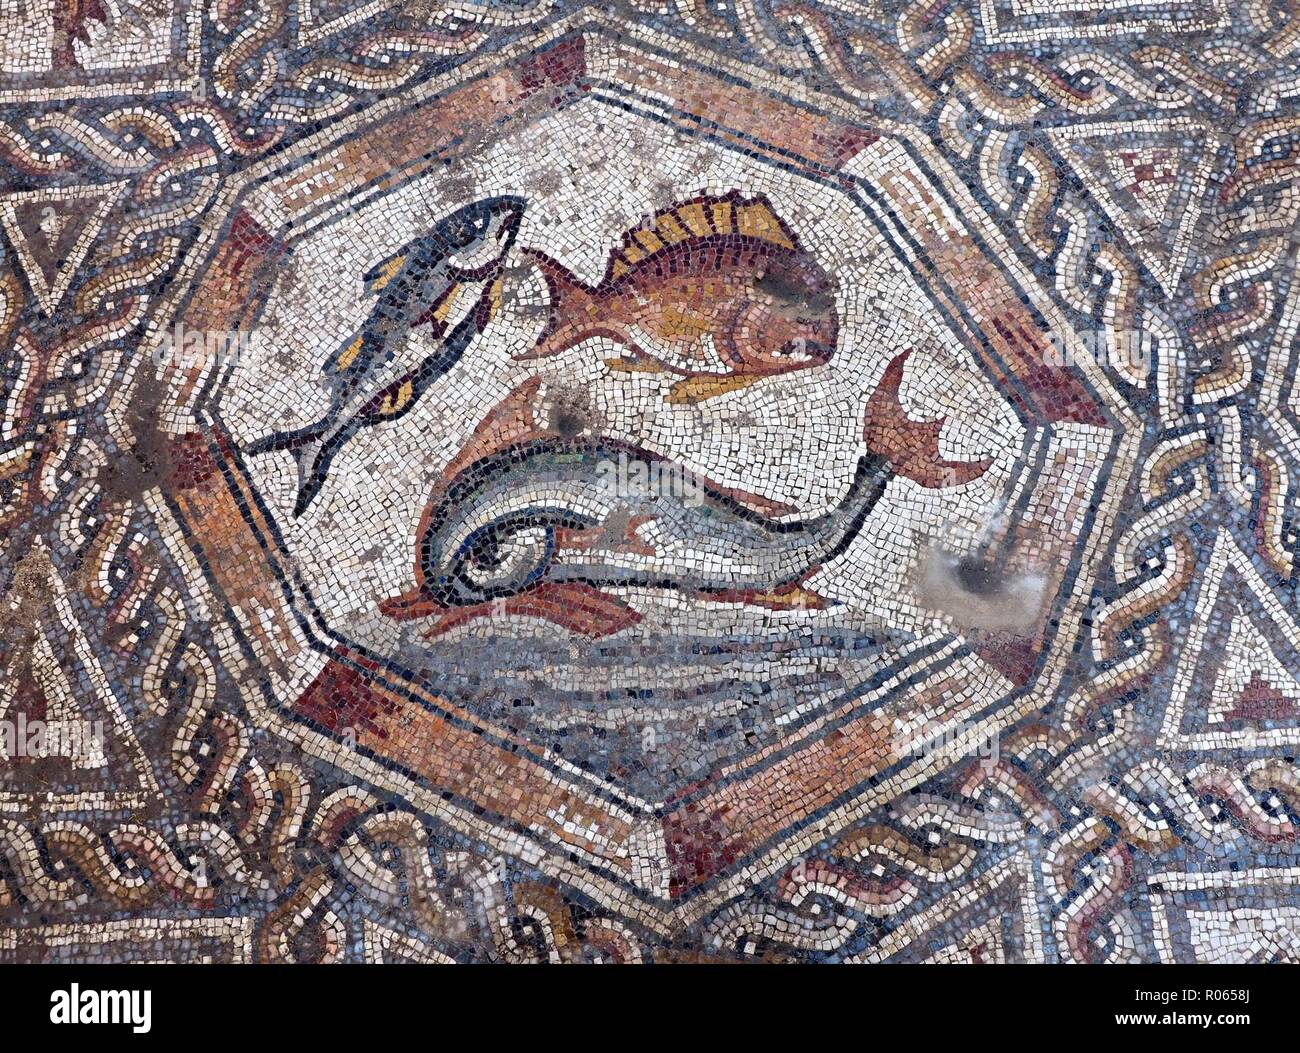 5792. The Lod Mosaic, a 3 rd. C. Roman mosaic from a Roman villa excavated in the city of Lod near Tel-Aviv.  Detail shows varrious fish, Stock Photo